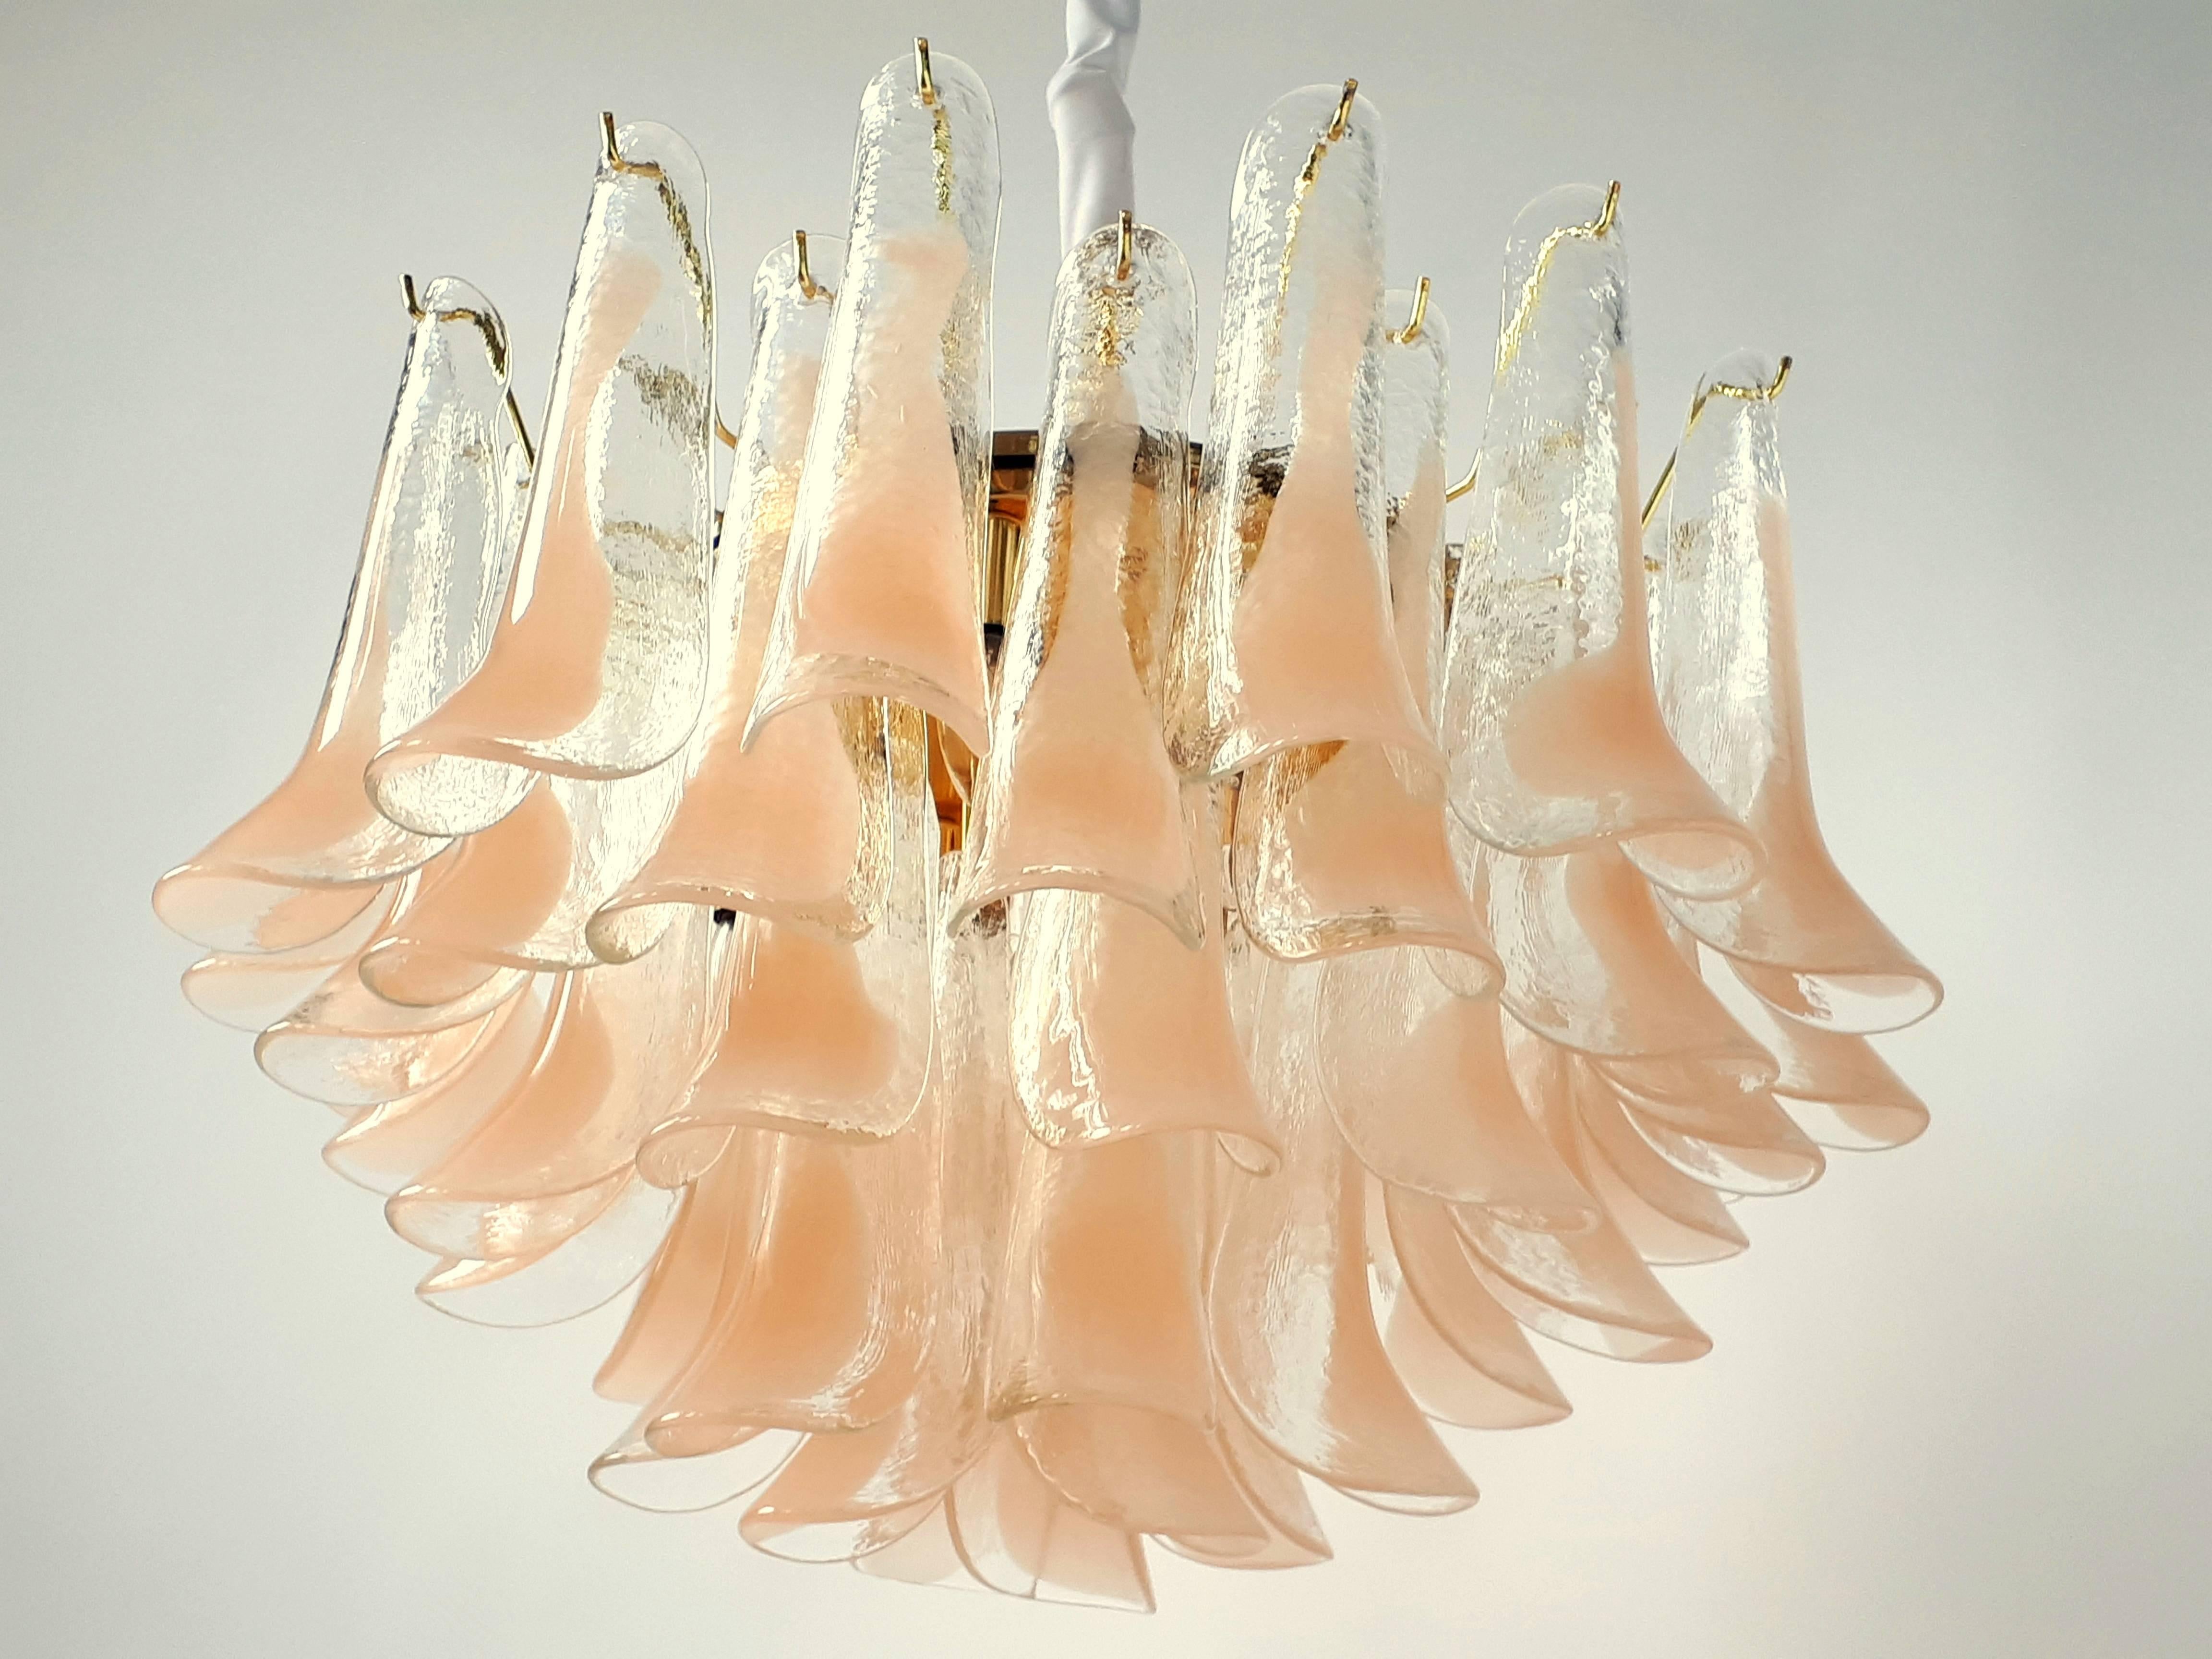 Thick sculptural texturized mouthblowed glass petal in a peach tone color 

Very warm glow while lighted. 

Mounted on a brass-plated frame.

11 regular E26 size socket. 

Measures: 29 inches wide by 24 inches high.

Weight 70 pounds.